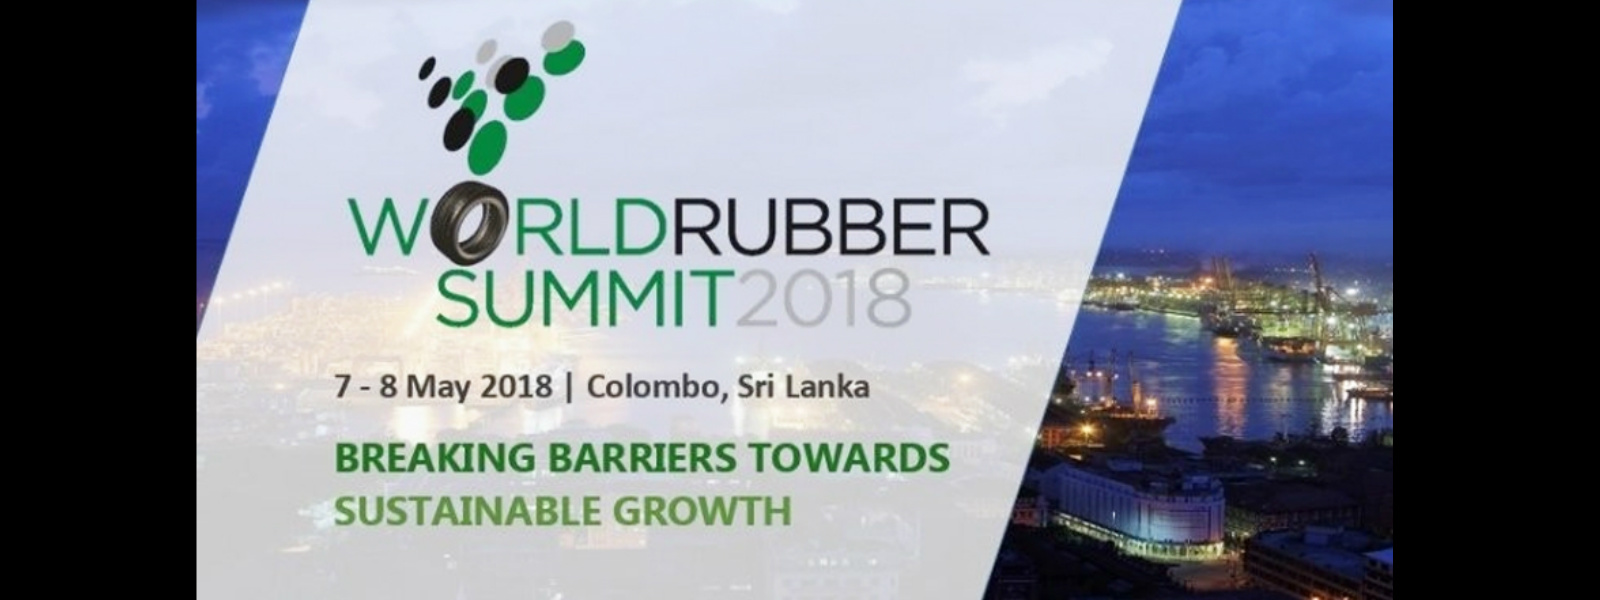 World rubber leaders gather in Colombo for summit